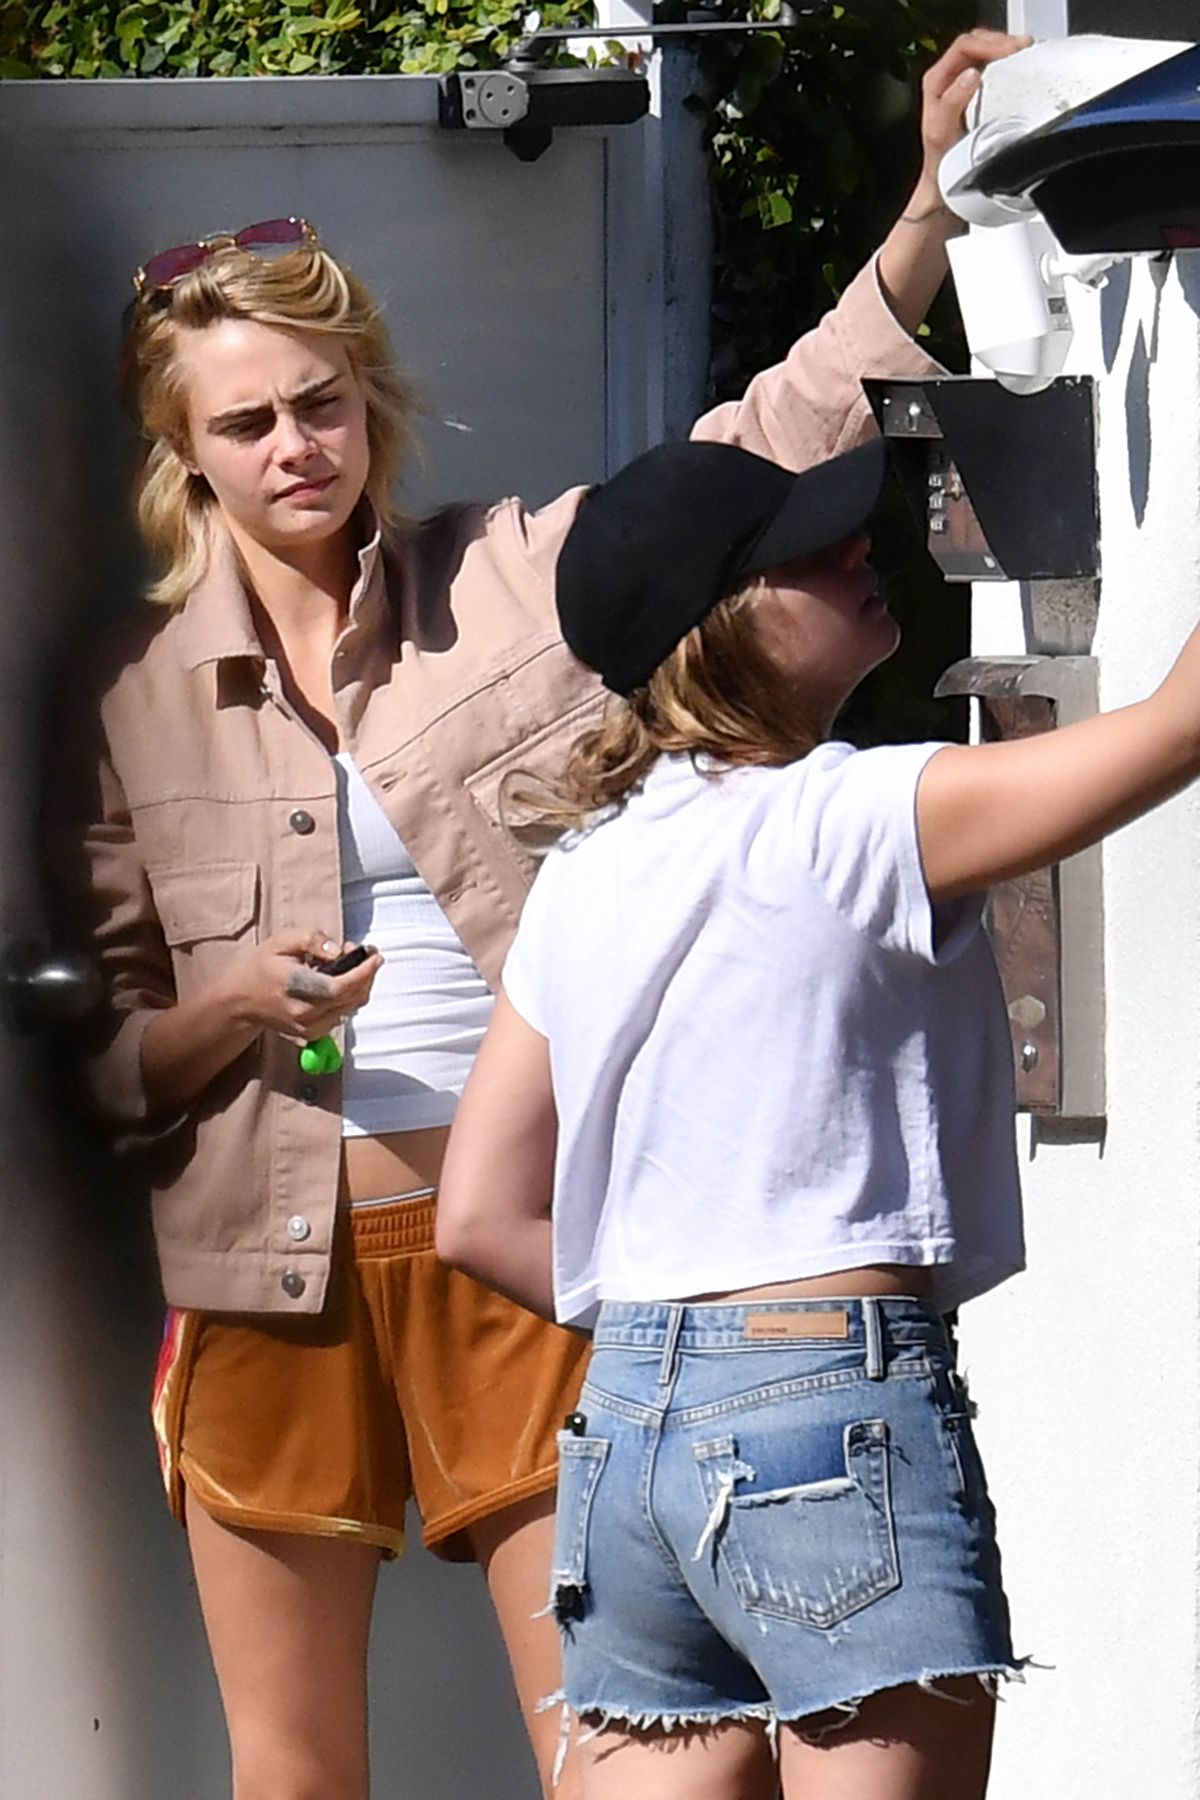 ashley-benson-and-cara-delevingne-out-shopping-in-hollywood-05-28-2019-4.jpg